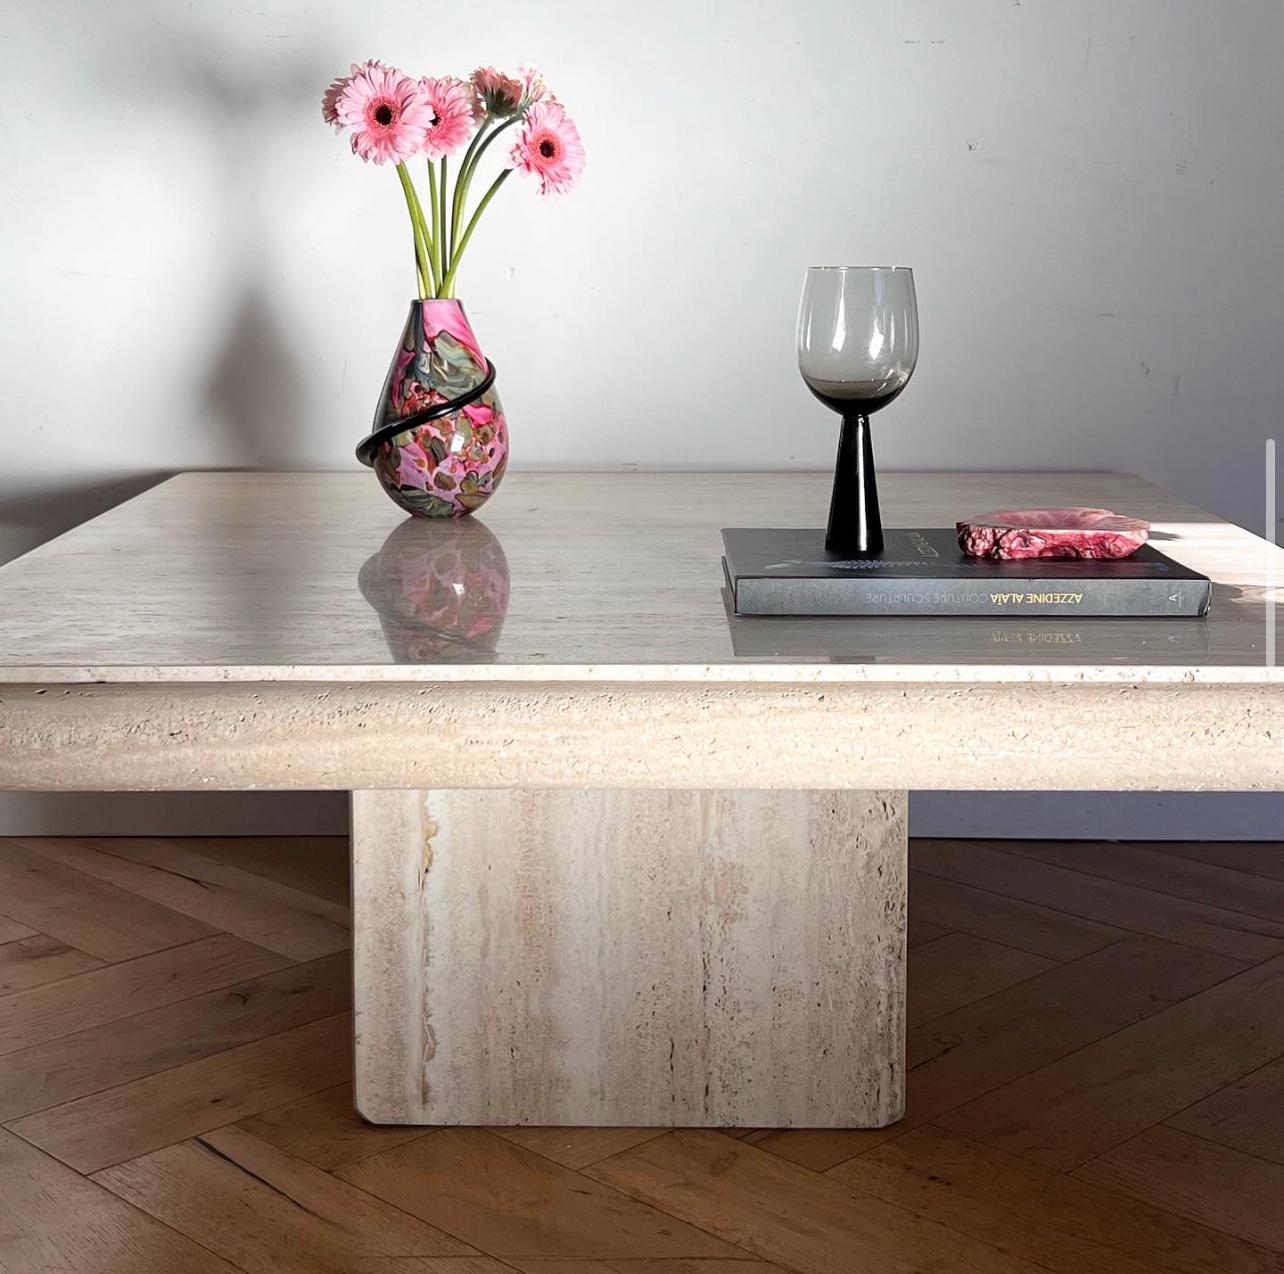 A statement vintage Italian travertine coffee table by renowned maker Stone International, circa early 1970s. Made in Florence, Italy. Featuring a thick bullnose edge on the top and shaved corners on the base, this table showcases the exquisite